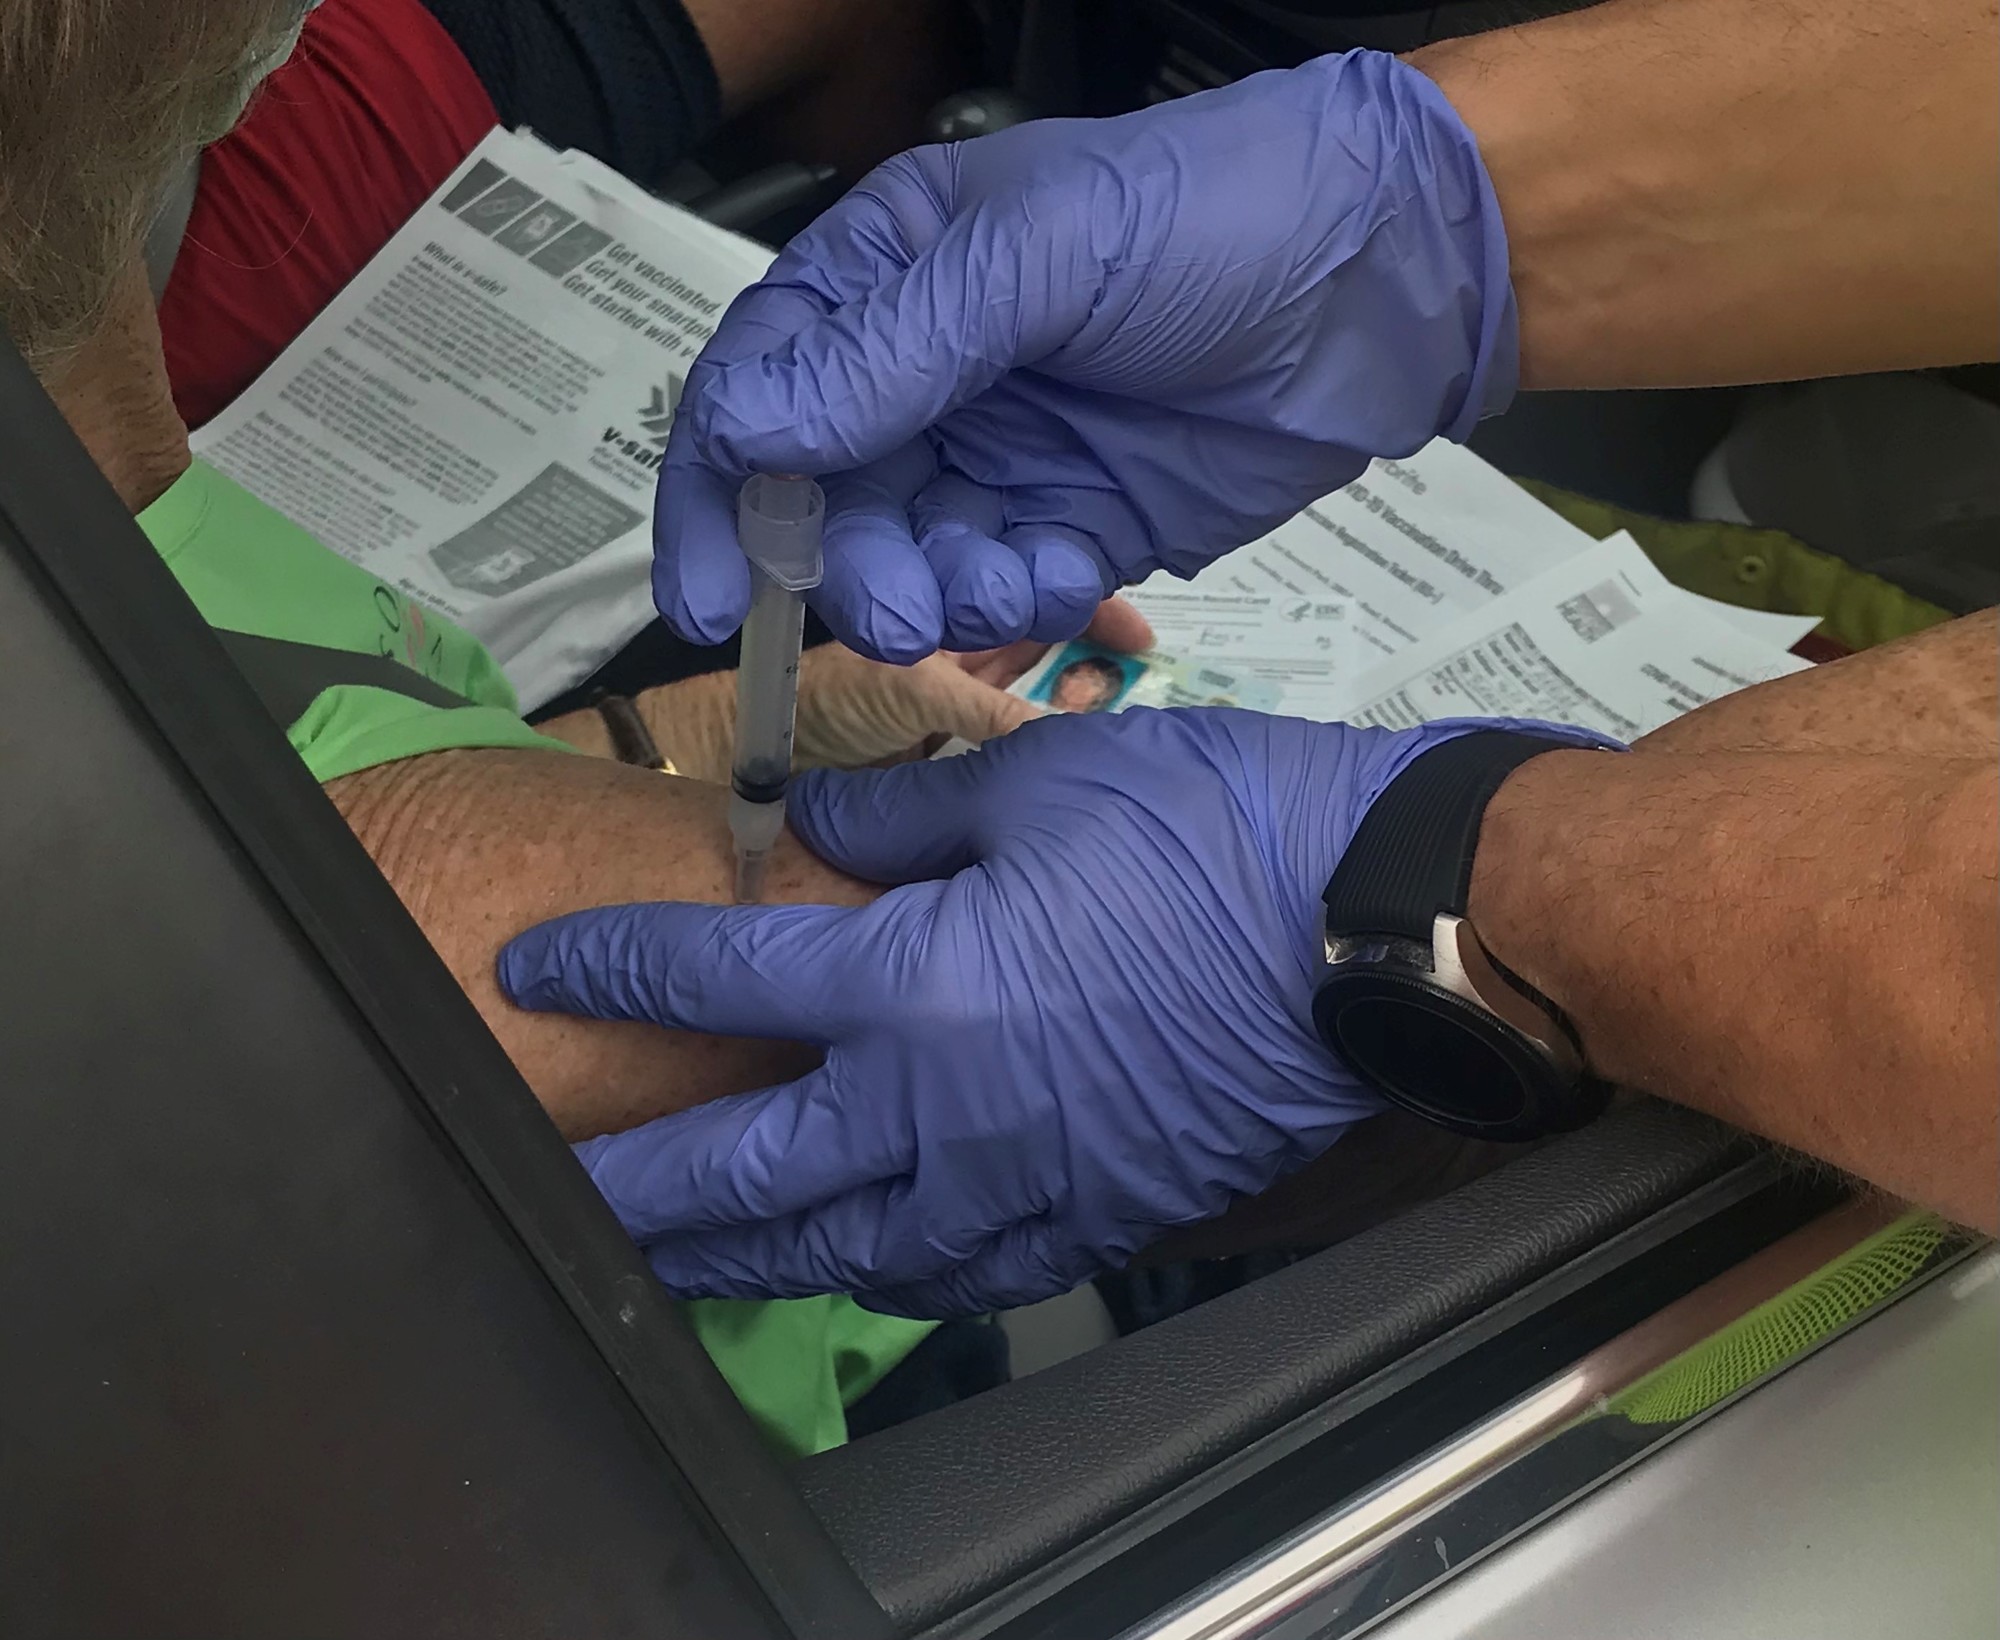 A COVID-19 vaccination is given to a visitor to the drive-thru vaccination operation at Tom Bennett Park. (Courtesy Dept. of Health)